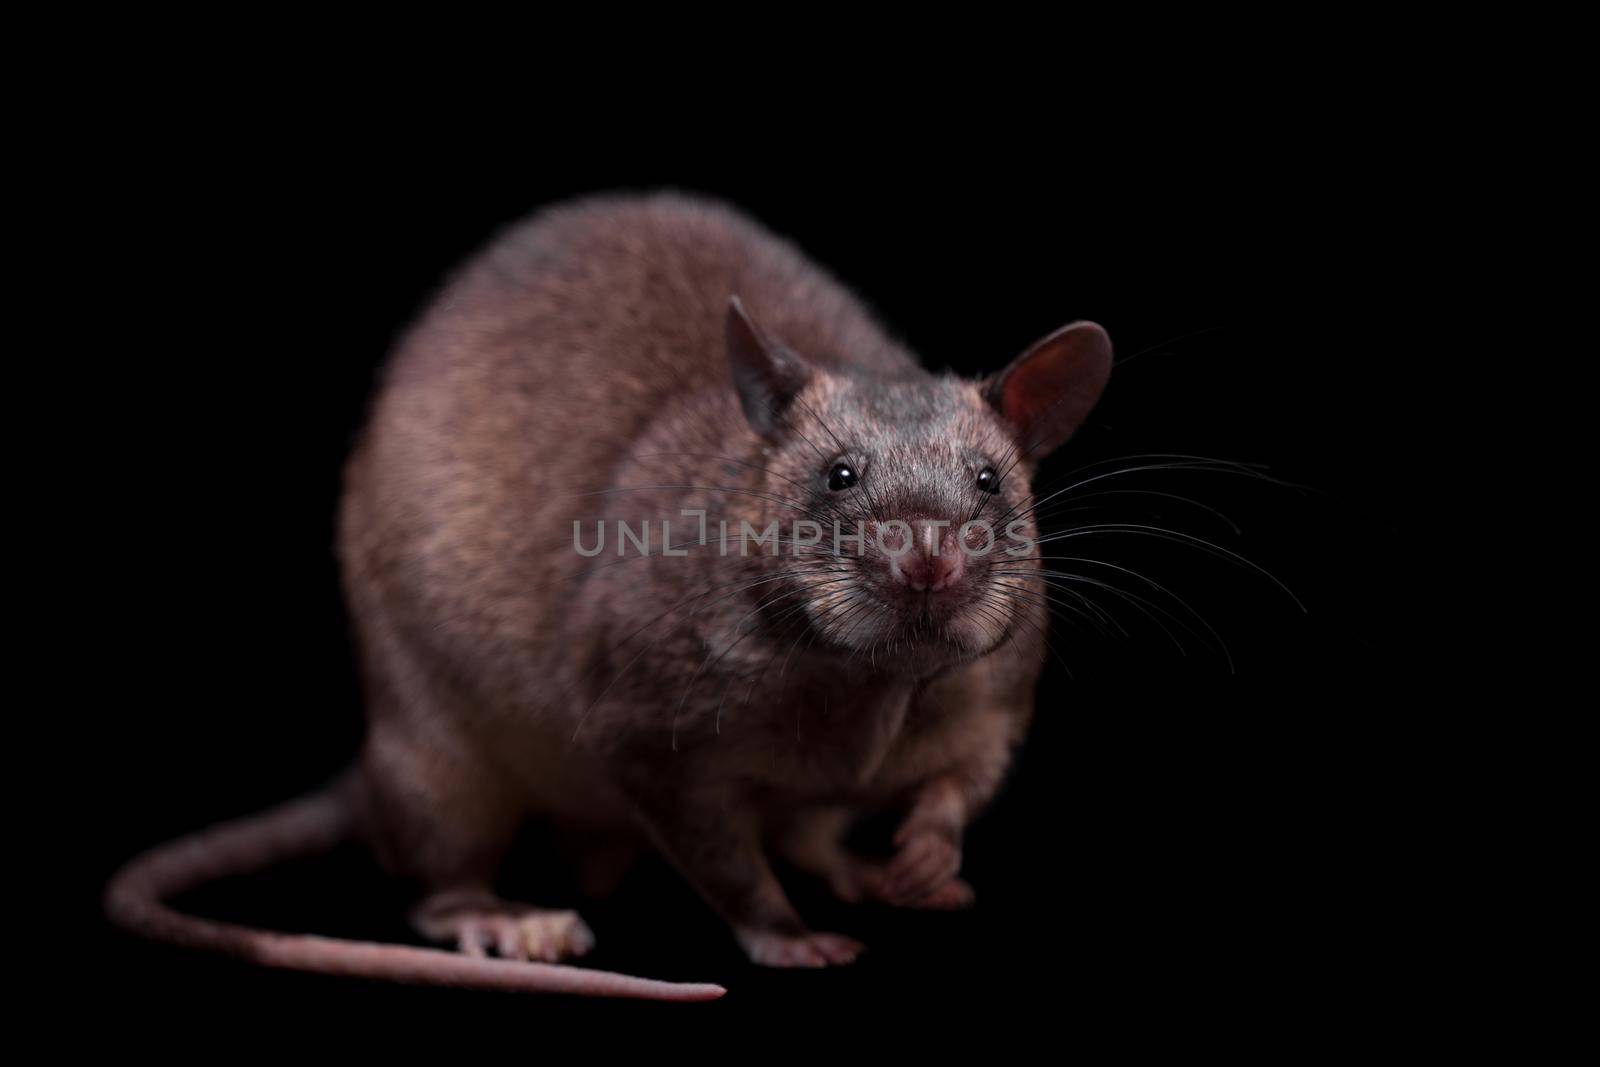 Gambian pouched rat, 3 years old, on black by RosaJay